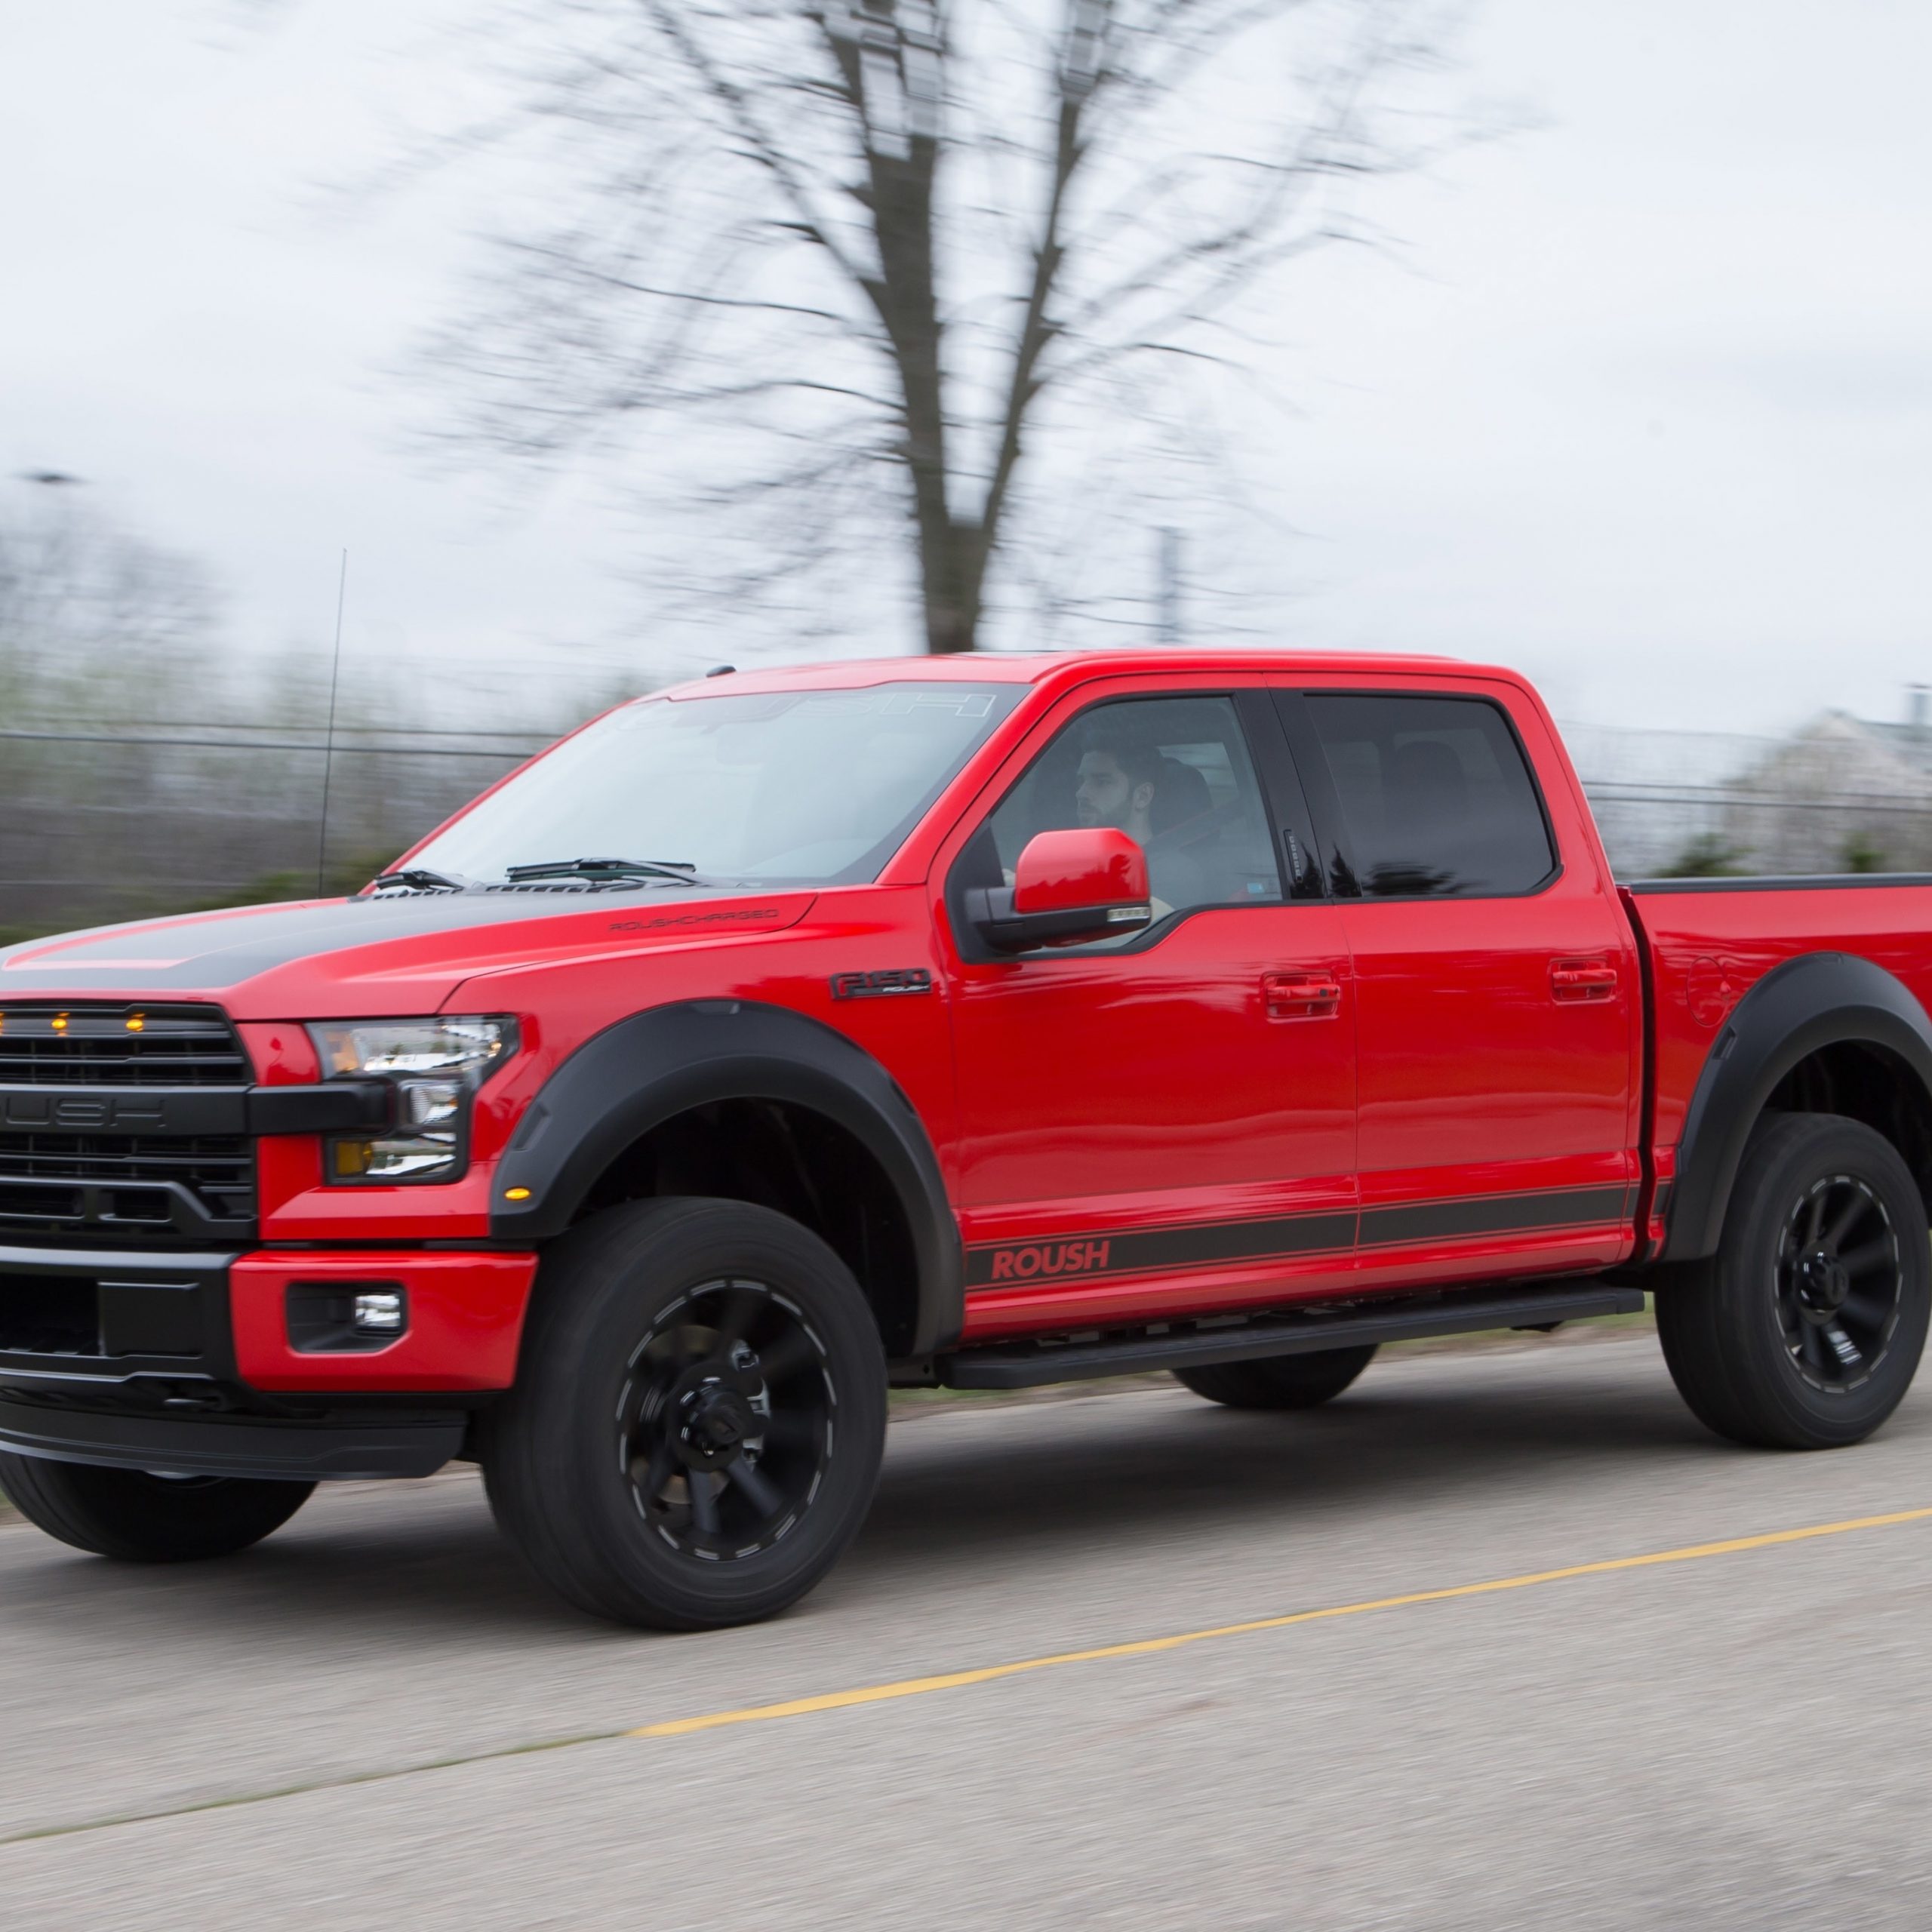 Video of Ford Roush F 150.